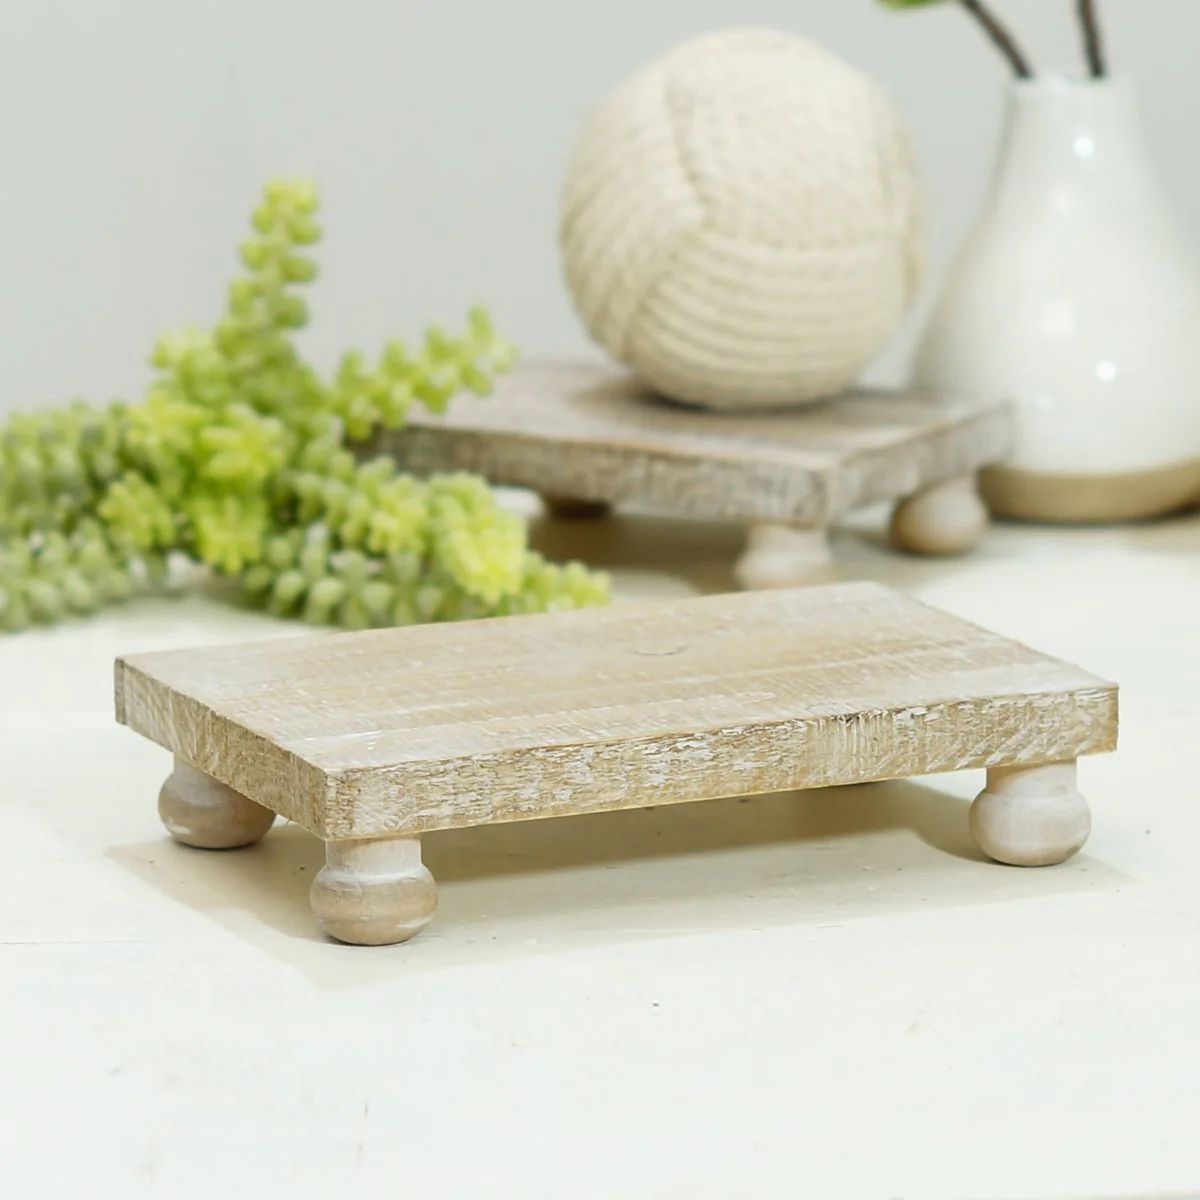 8"L Rustic Wash Wooden Riser | The Nested Fig